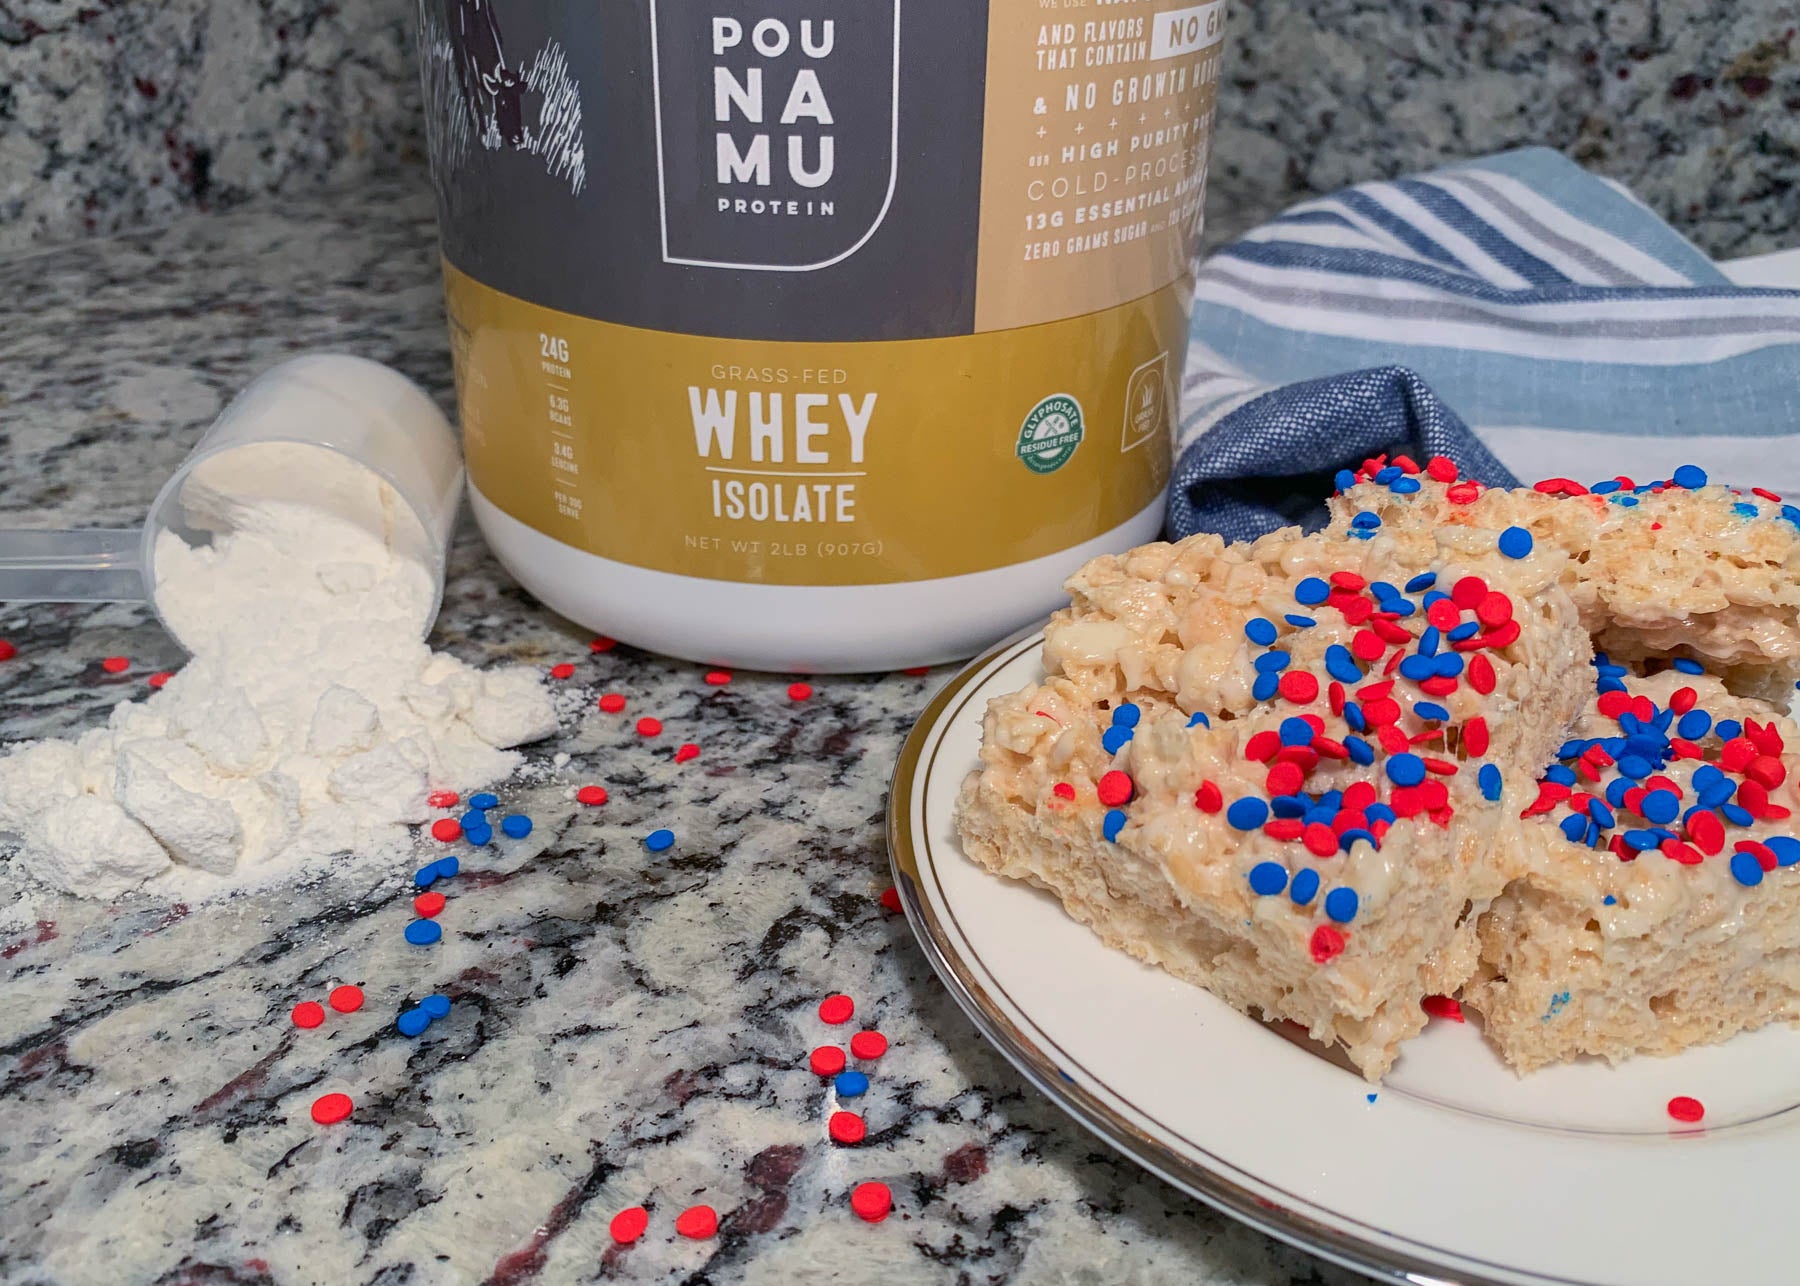 Pounamu Protein forth of July Protein Rice Krispie Treats with red and blue sprinkles on top